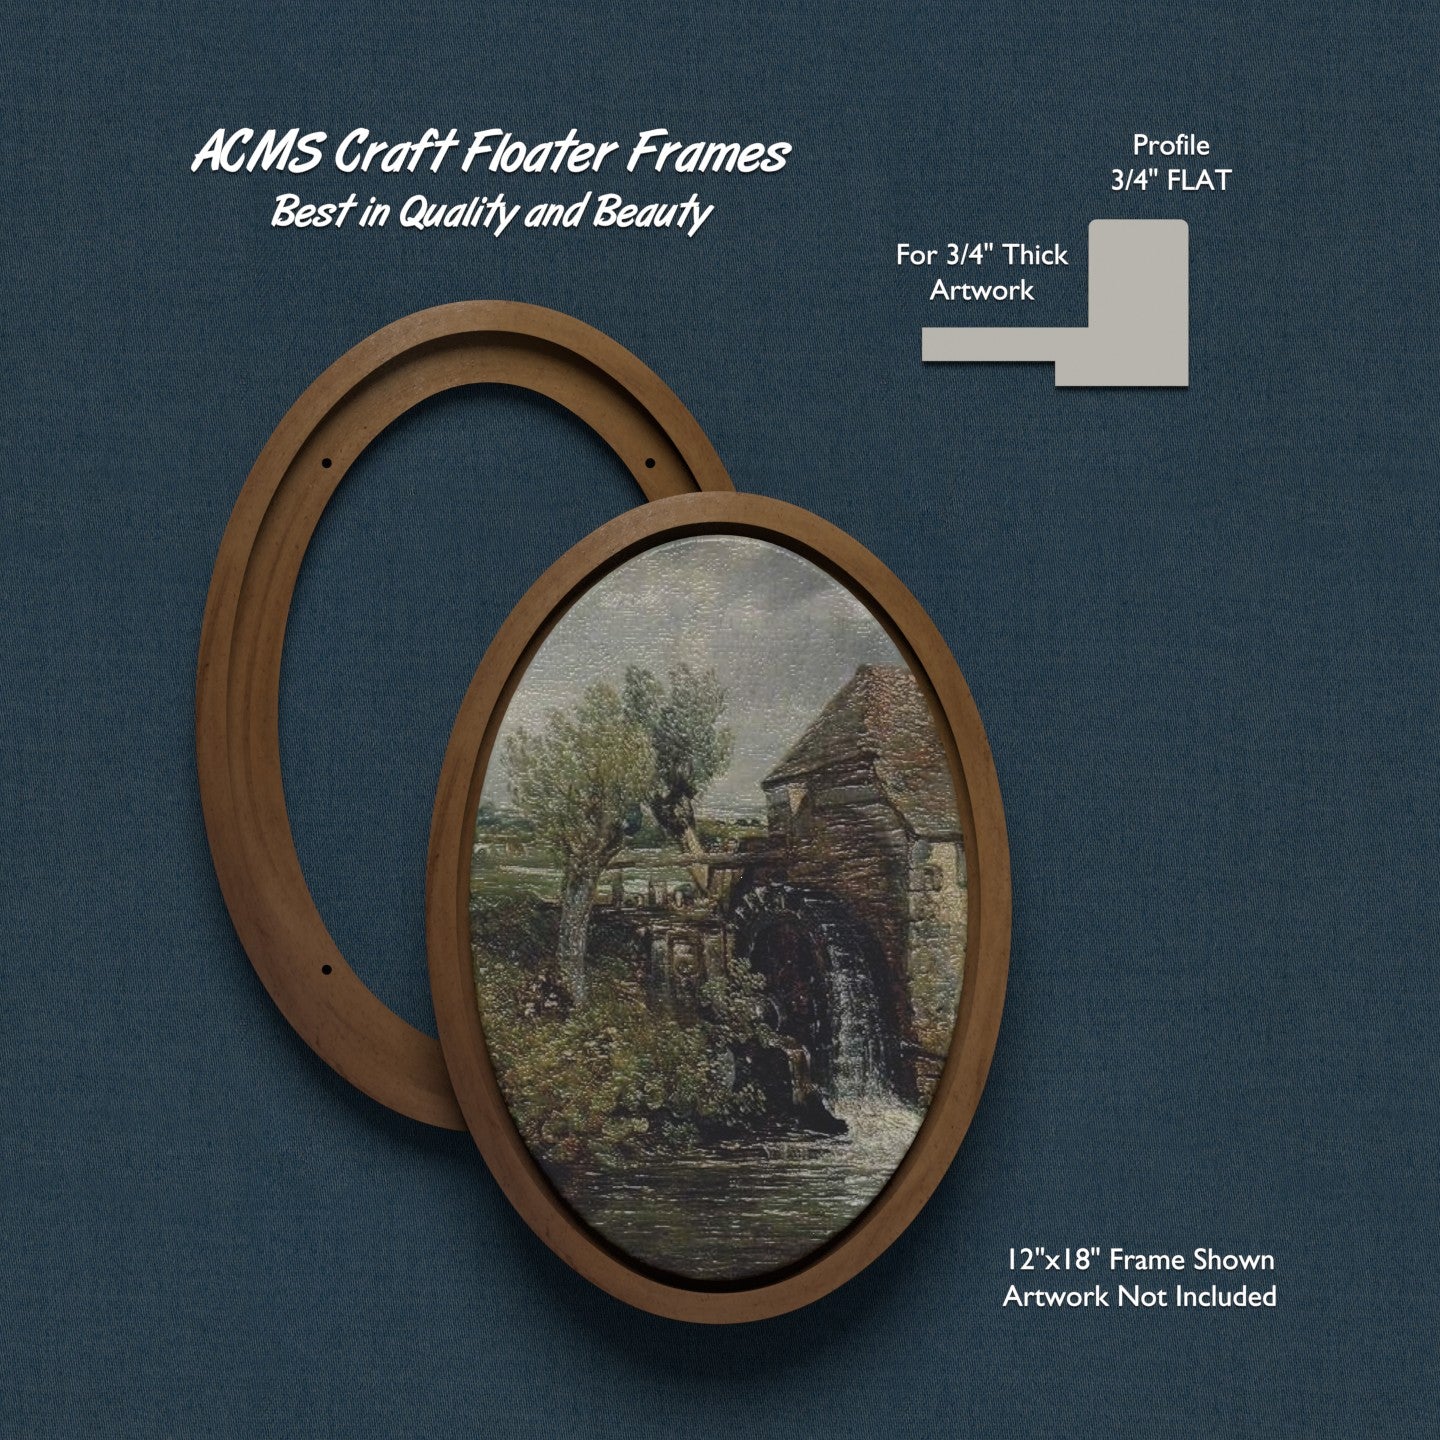 ACMS Oval Craft Floater Frame - For 3/4" Thick Artwork - Profile 3/4" FLAT - 1 1/4" Thick Frame